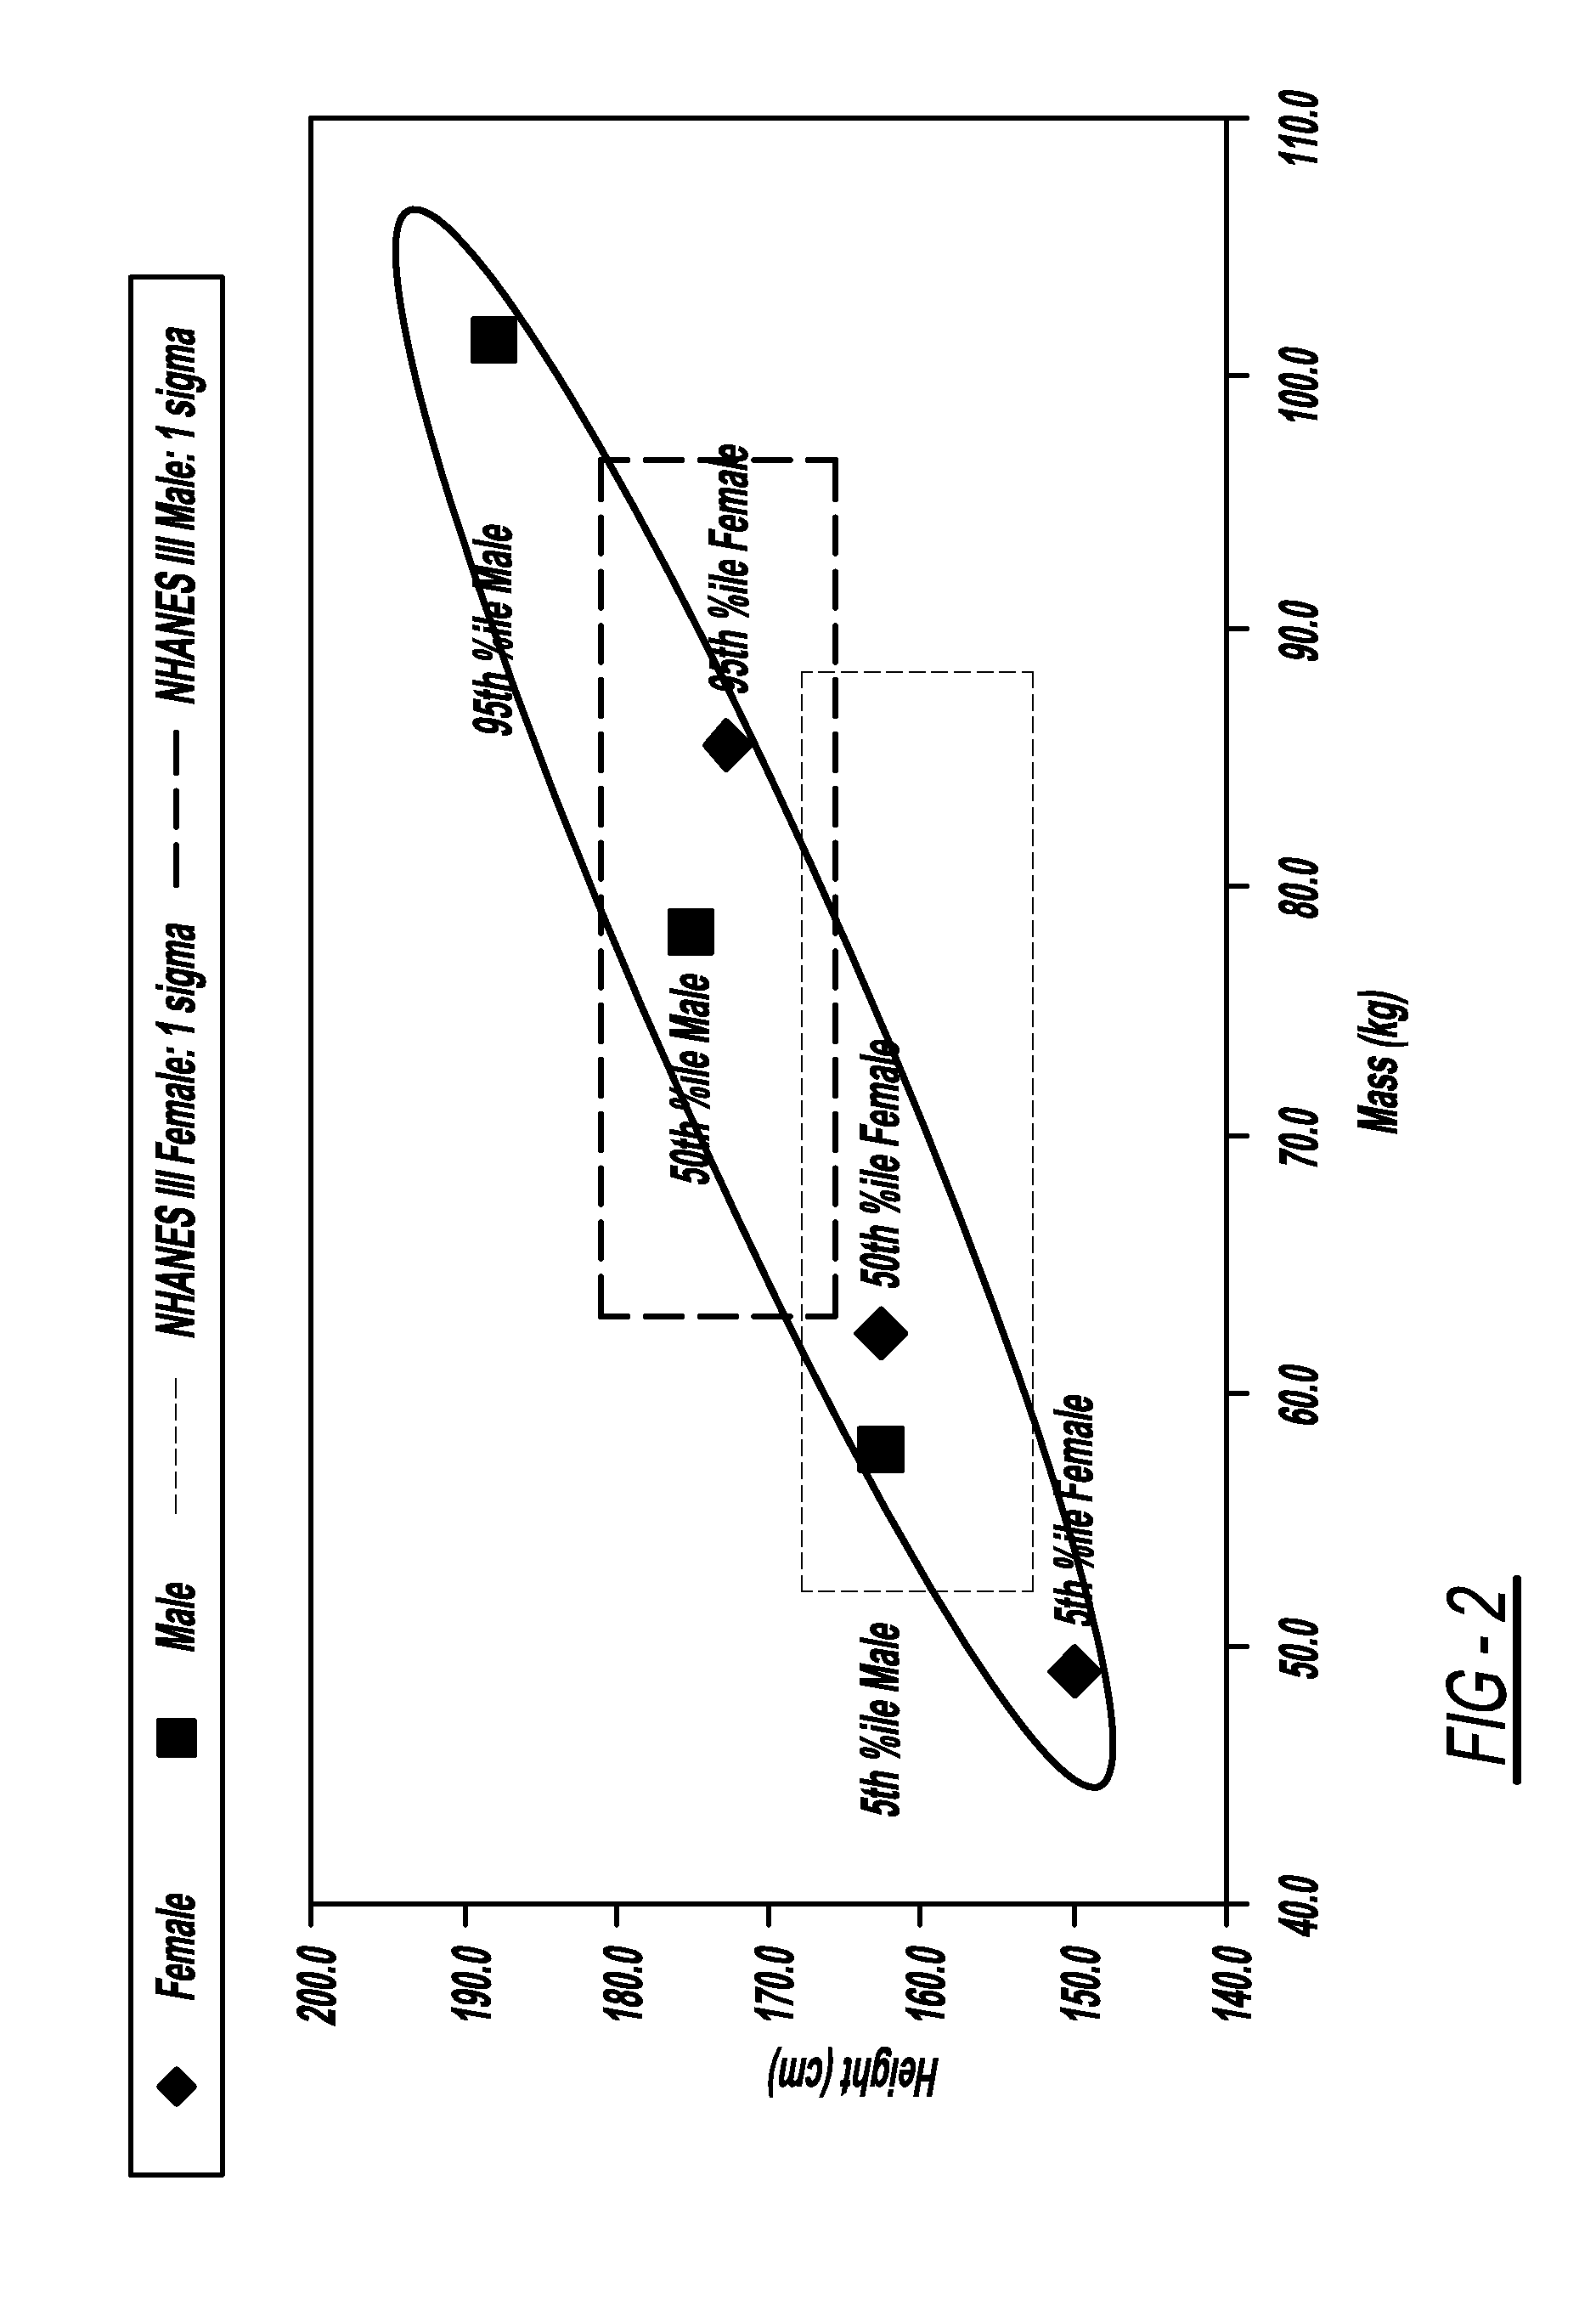 Performance-based classification method and algorithm for passengers